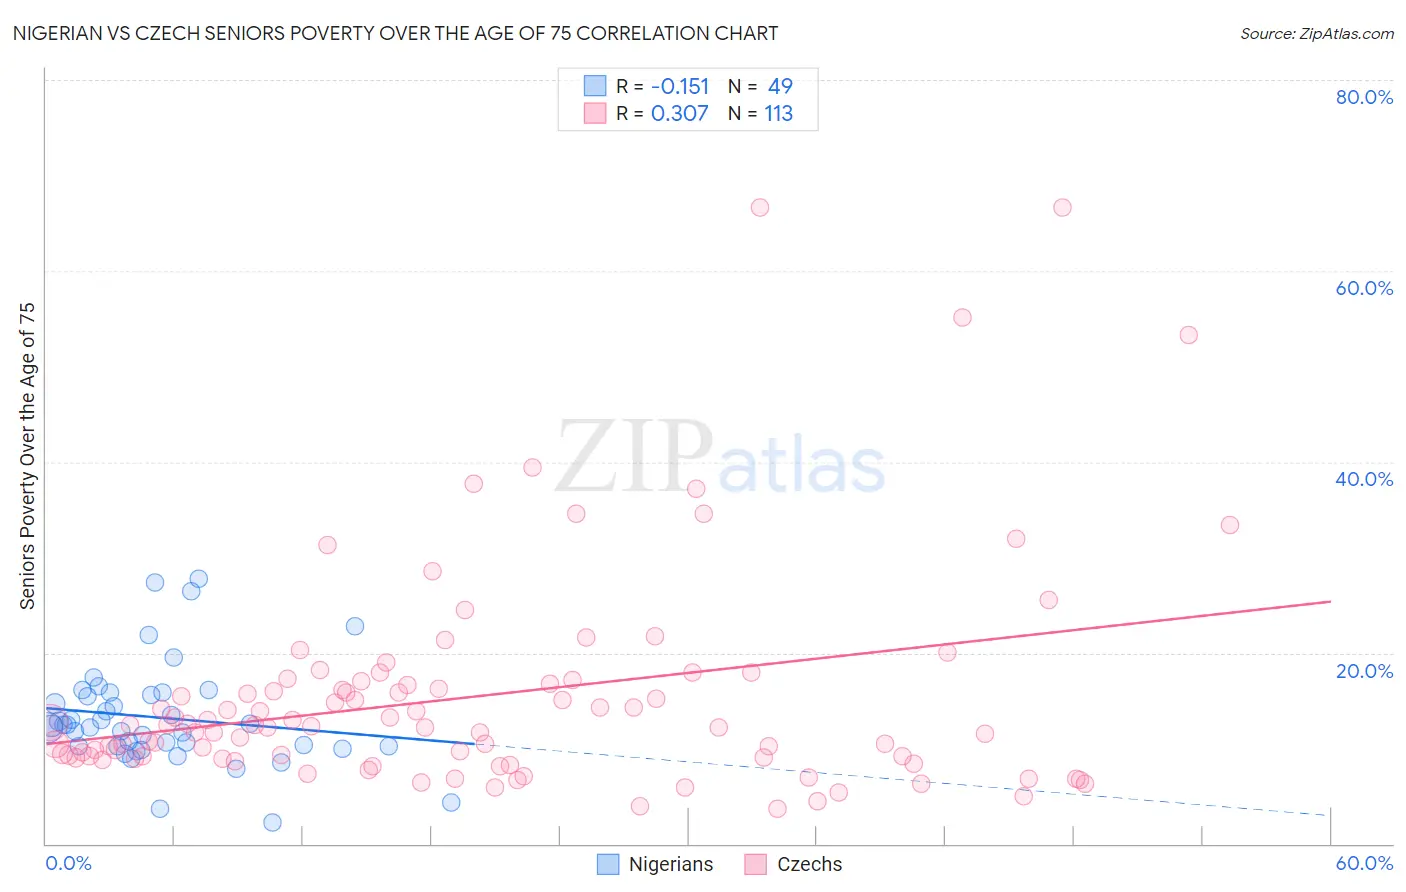 Nigerian vs Czech Seniors Poverty Over the Age of 75